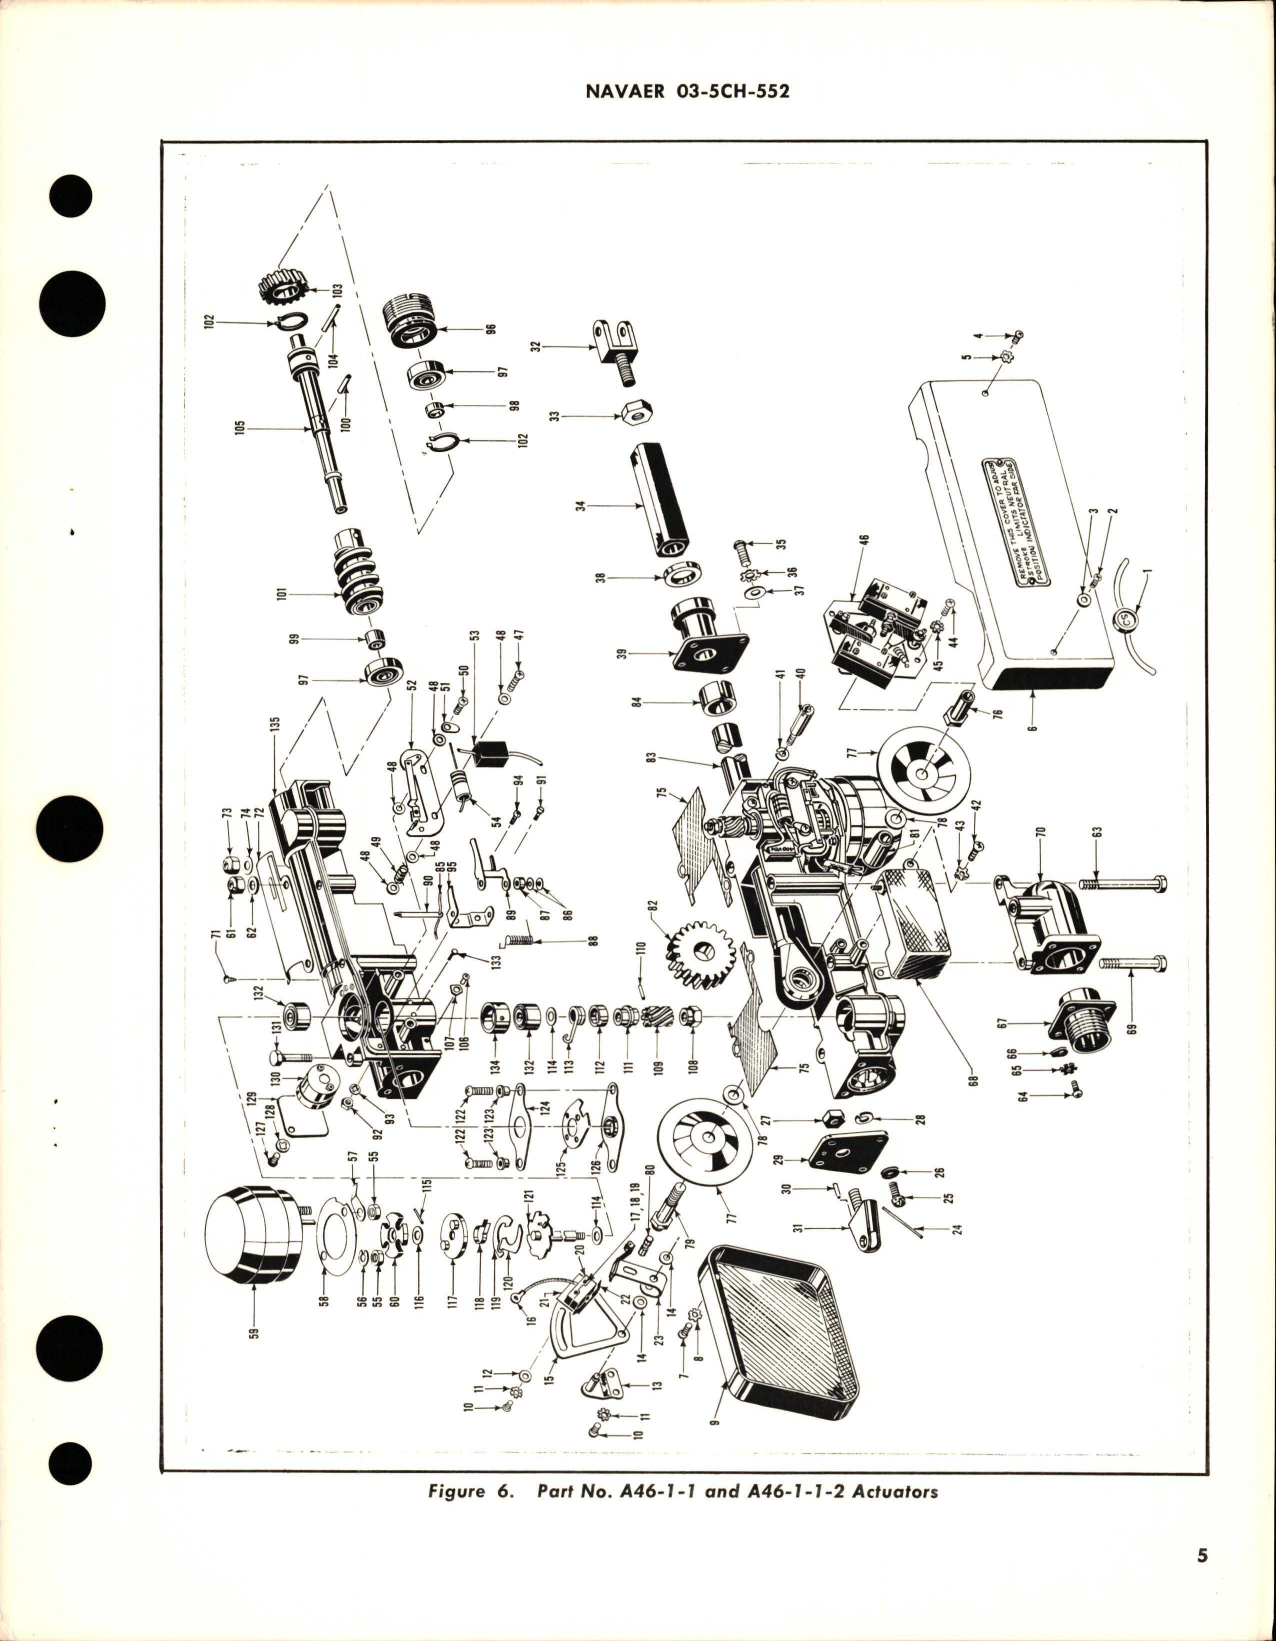 Sample page 5 from AirCorps Library document: Overhaul Instructions with Parts Breakdown for Rudder Trim Tab Actuator - A46-1-1 and A46-1-1-2 